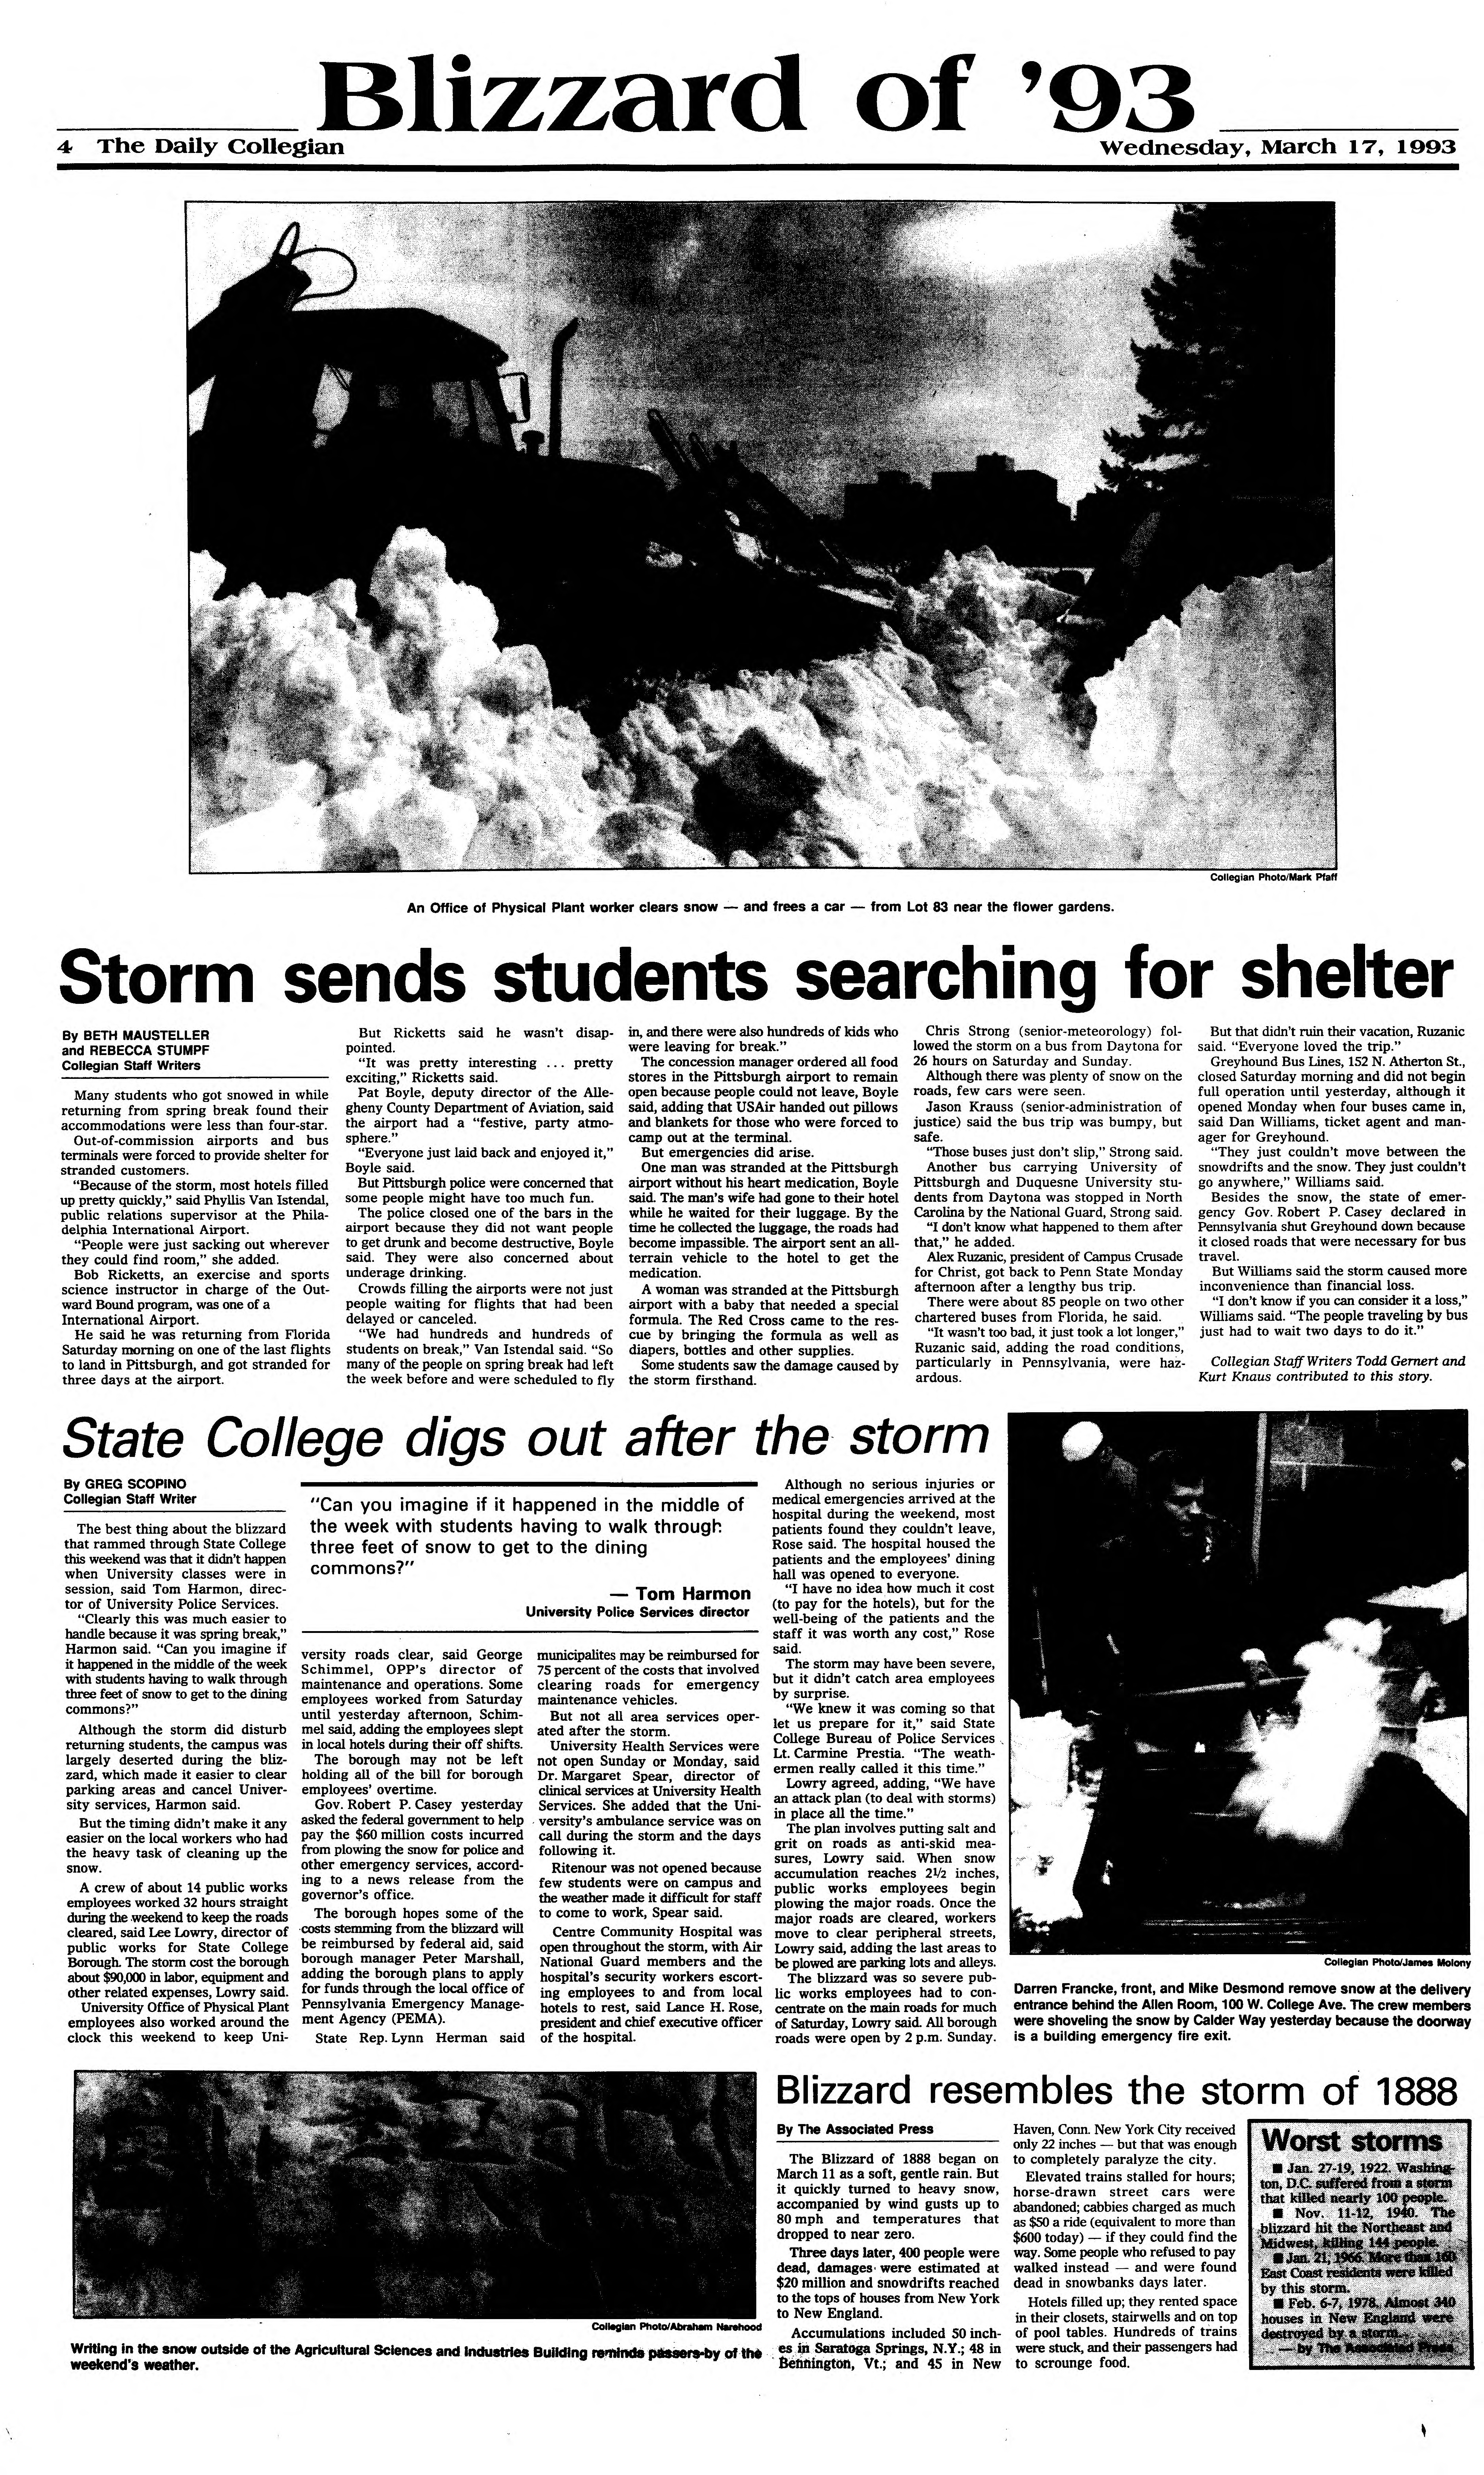 Daily Collegian Feature Page March 17, 1993